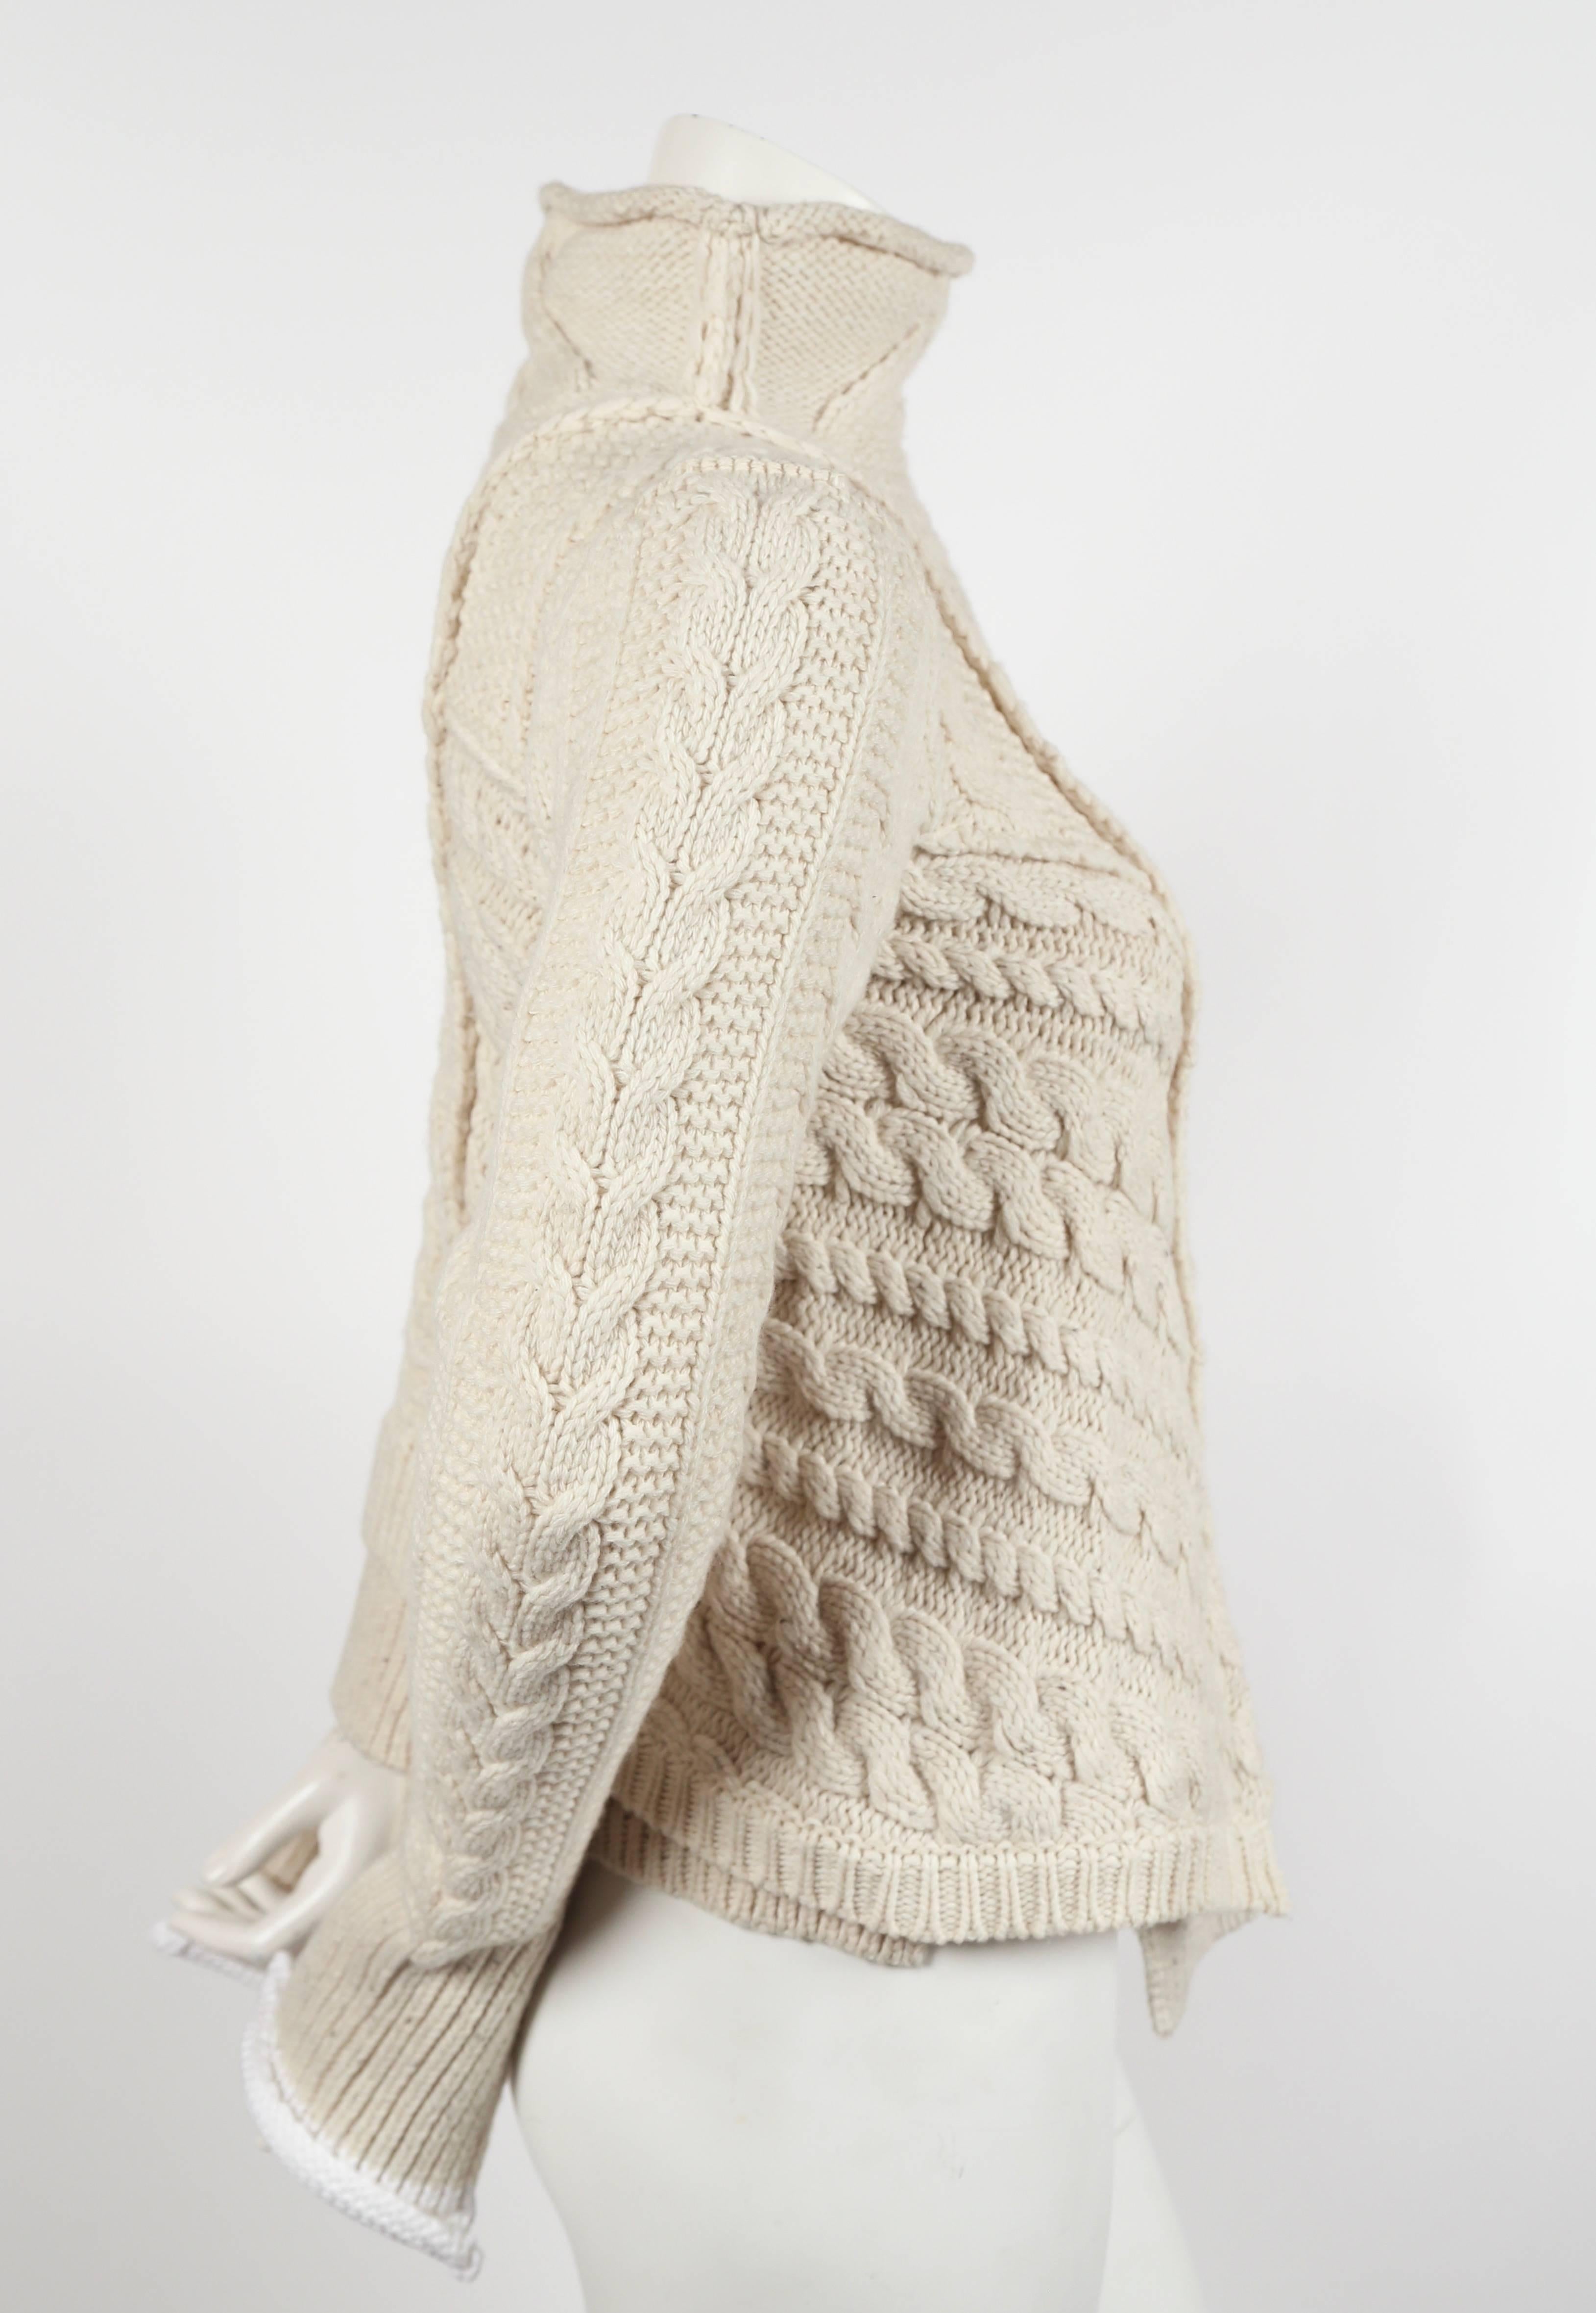 Very rare cream cable knit sweater with asymmetric hemline designed by Phoebe Philo for Celine dating to Fall of 2011. Labeled a size 'S'. Fits a size extra-small or small. Approximate measurements (unstretched): shoulder 14